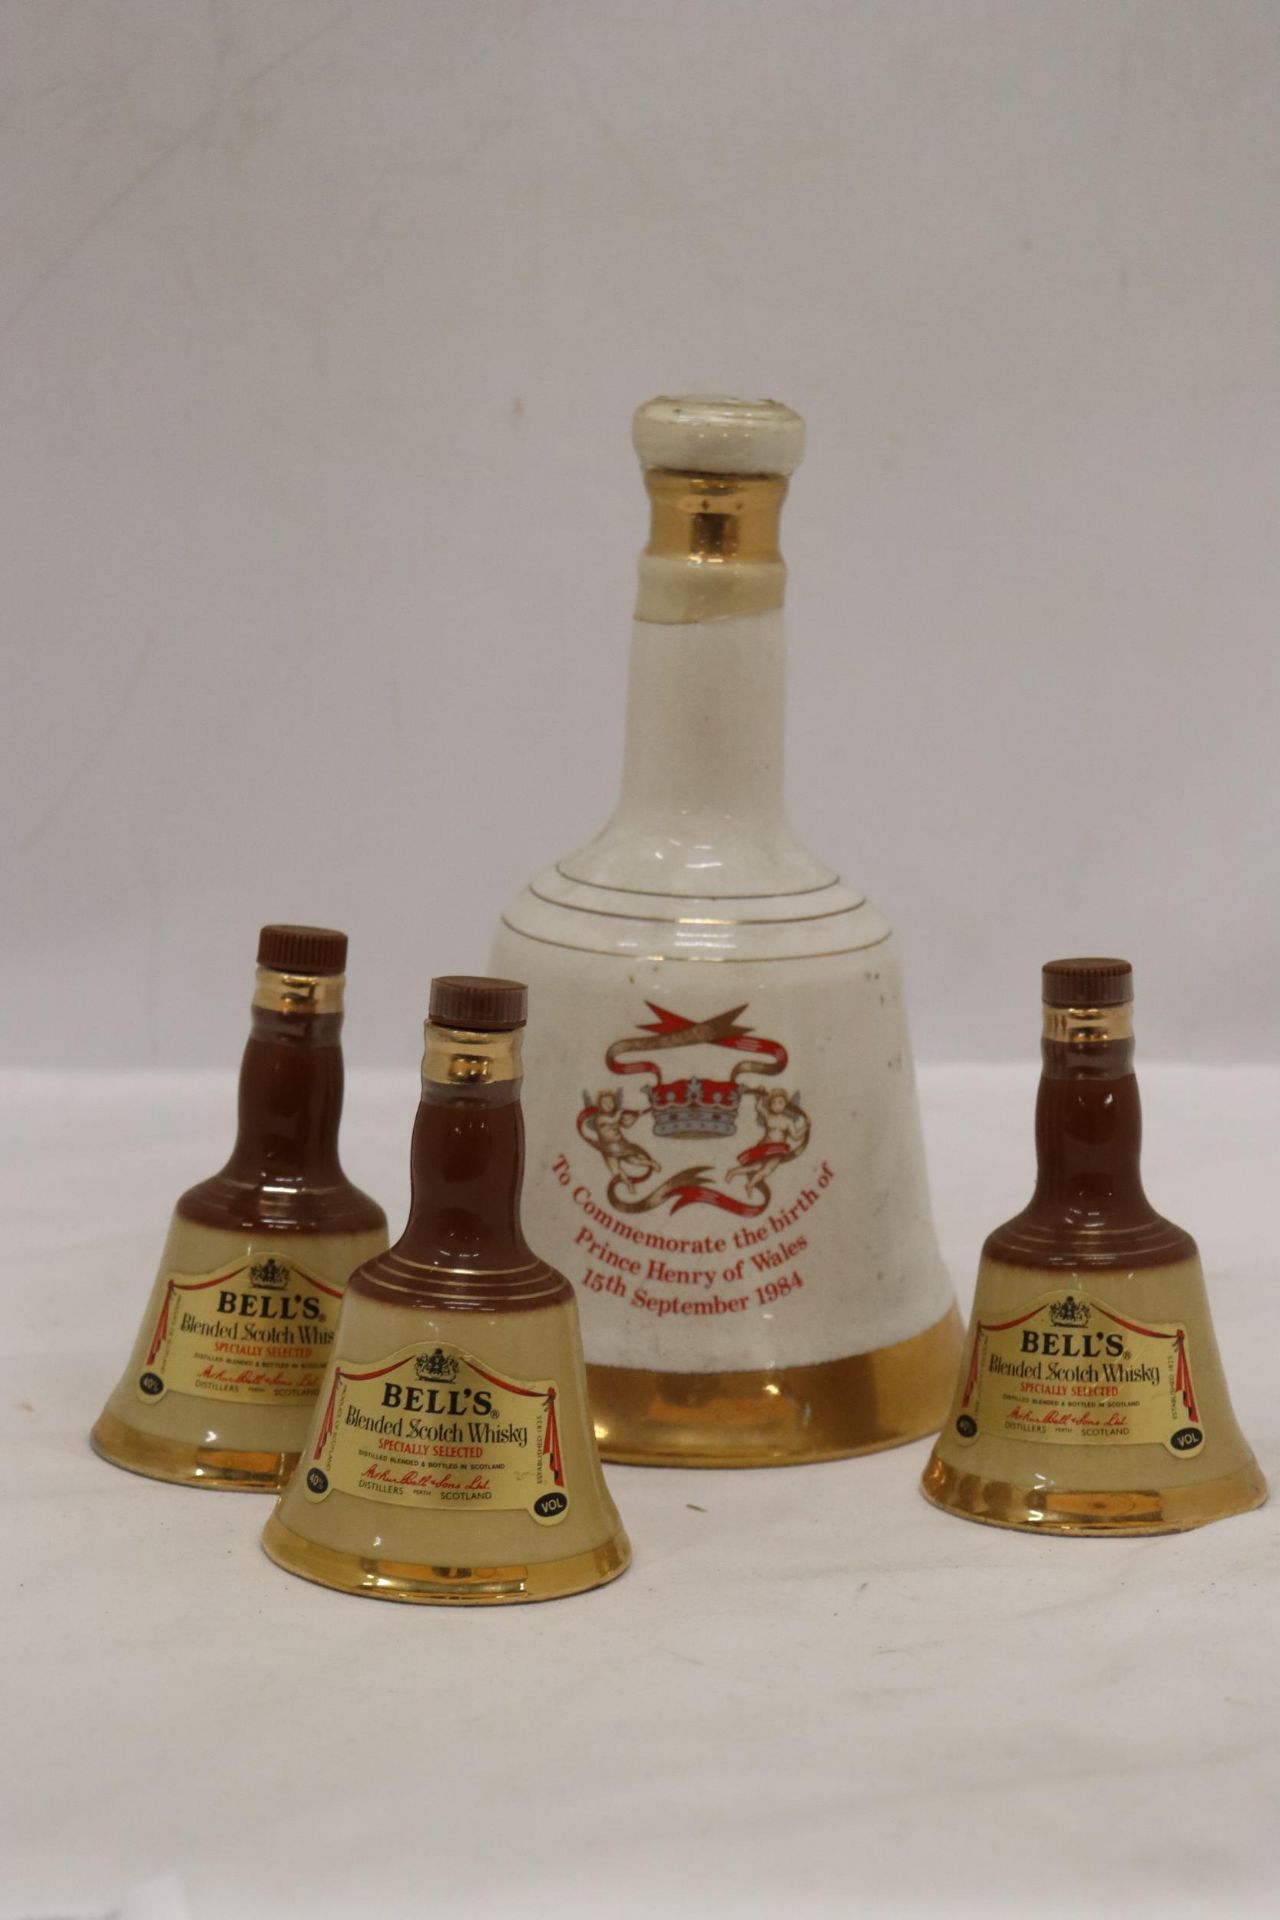 ONE LARGE AND THREE SMALL, BELL'S WHISKY CERAMIC DECANTERS - Image 2 of 4